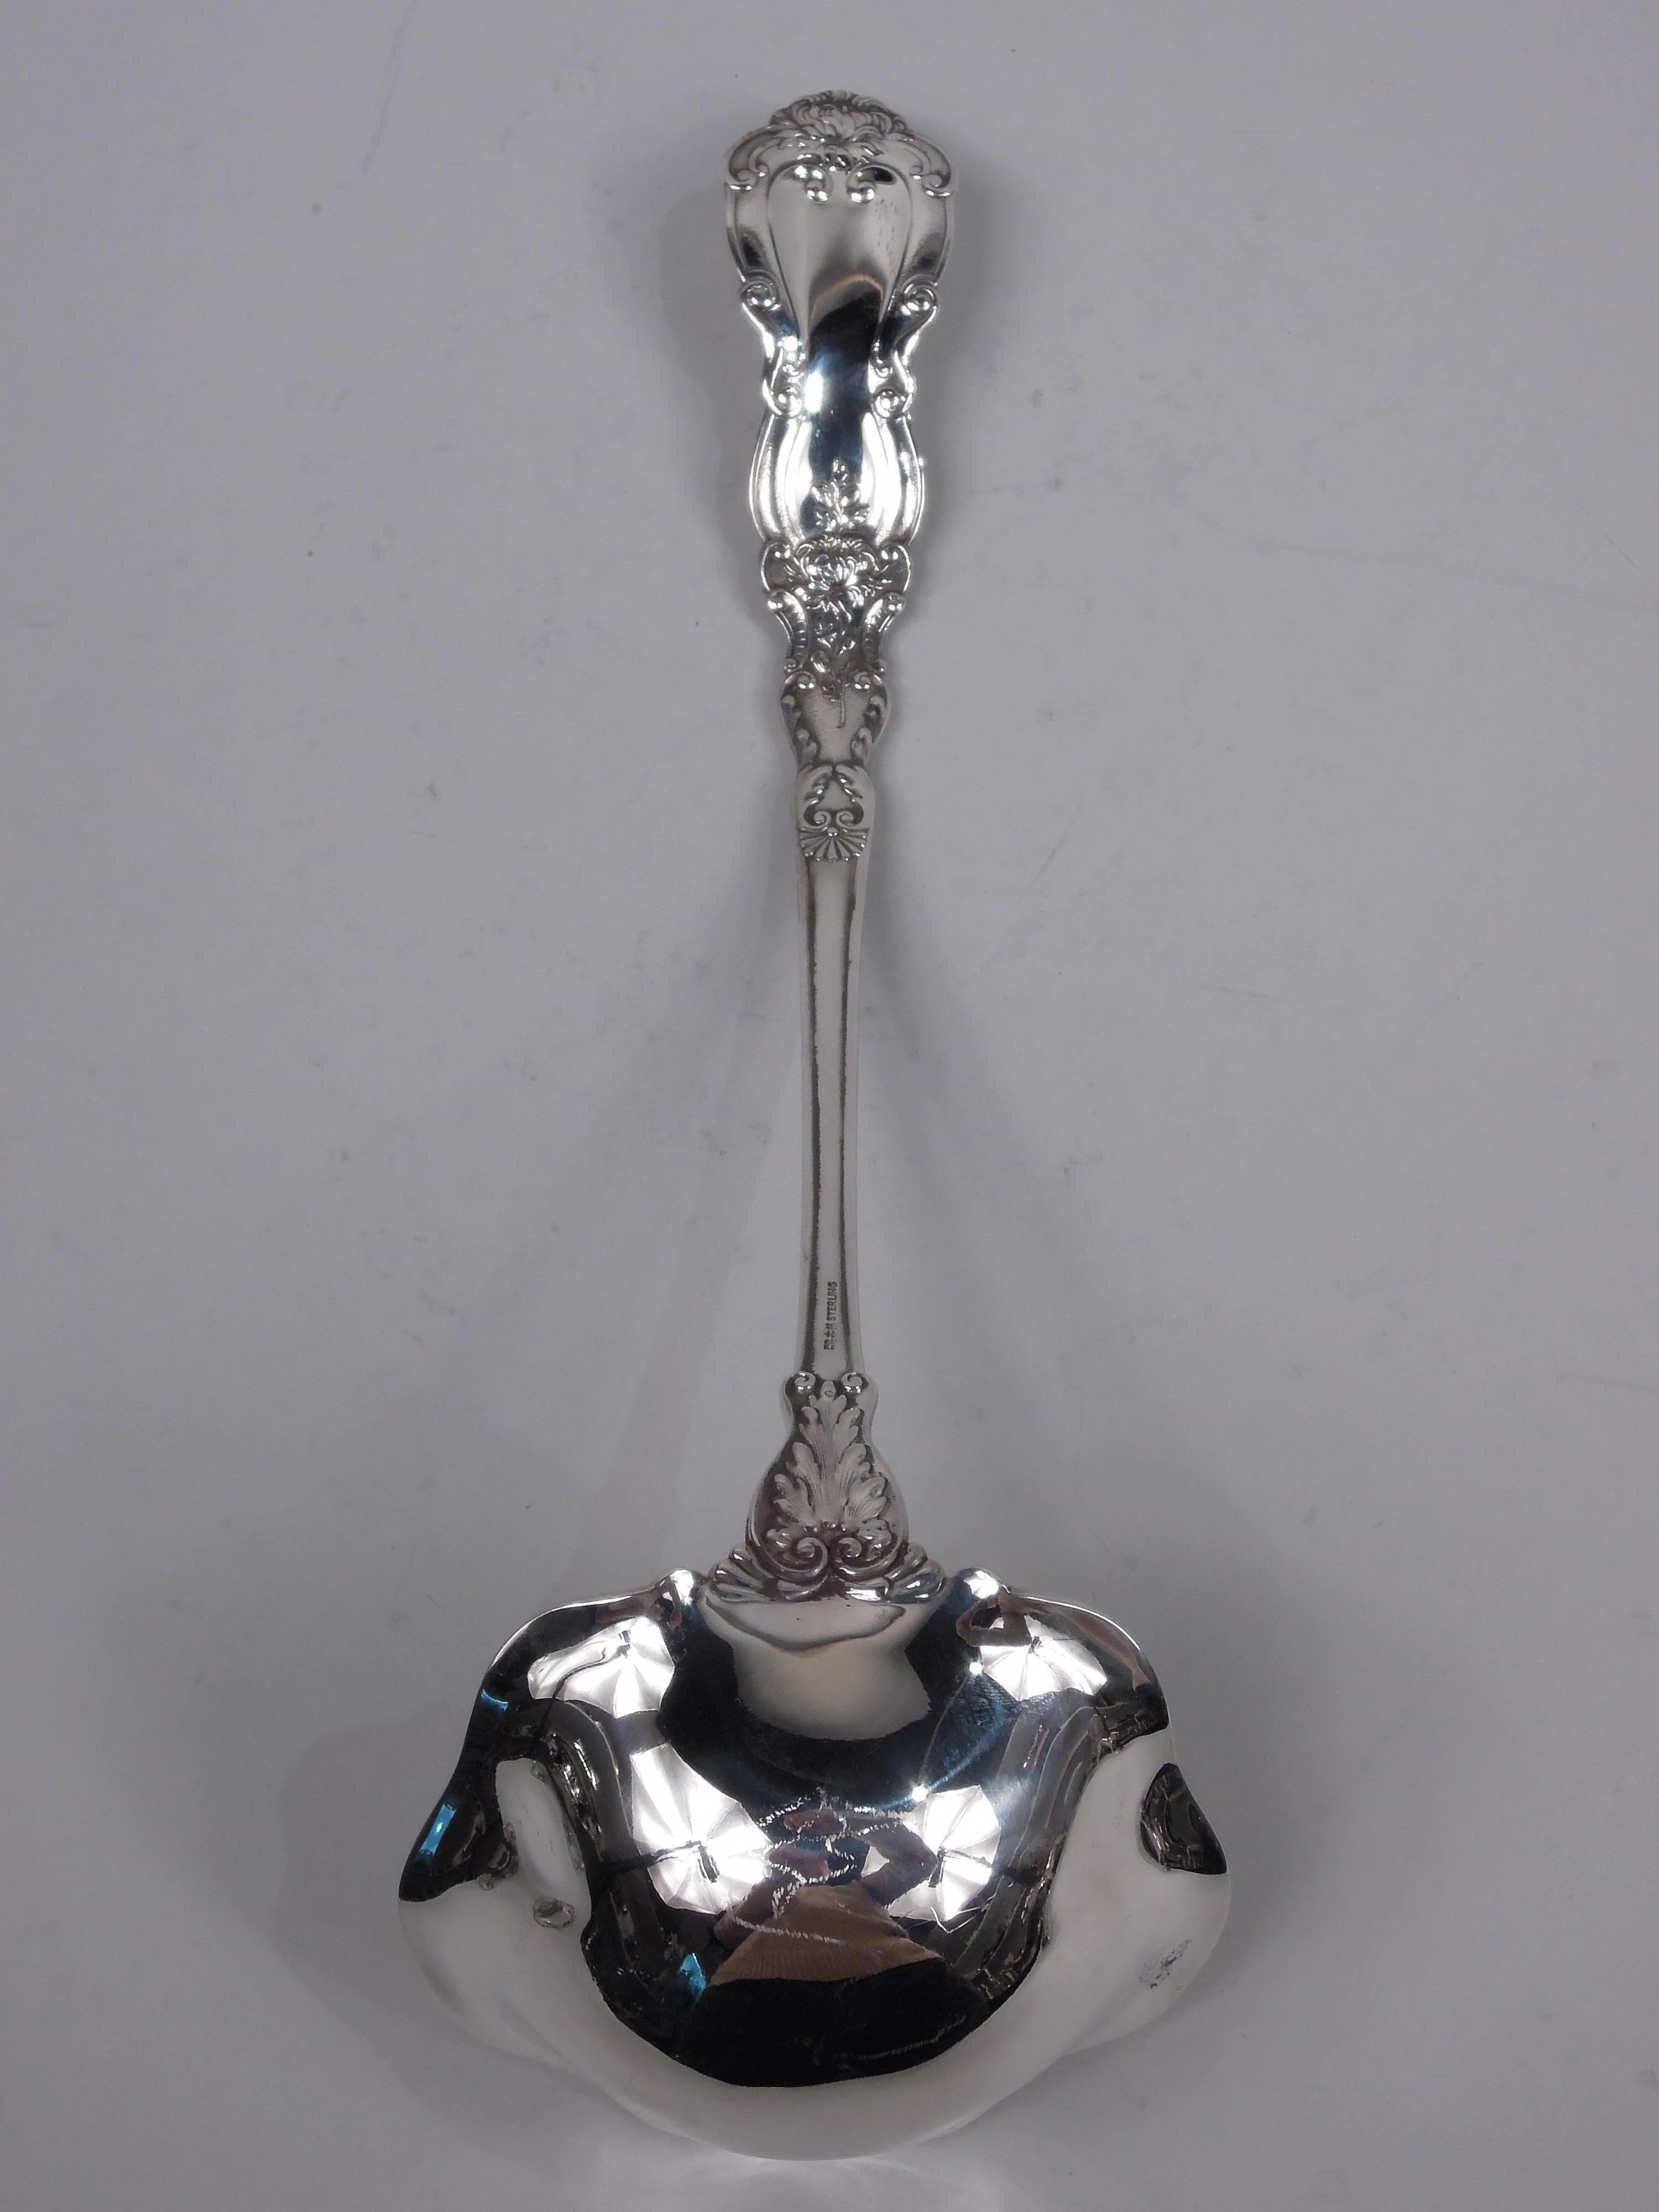 Imperial Chrysanthemum sterling silver soup ladle. Made by Gorham in Providence, ca 1900. Tapering stem with waisted terminal and lobed round bowl. Dense ornament with flowers and leaves. Bowl interior gilt-washed with same. A nice serving piece in